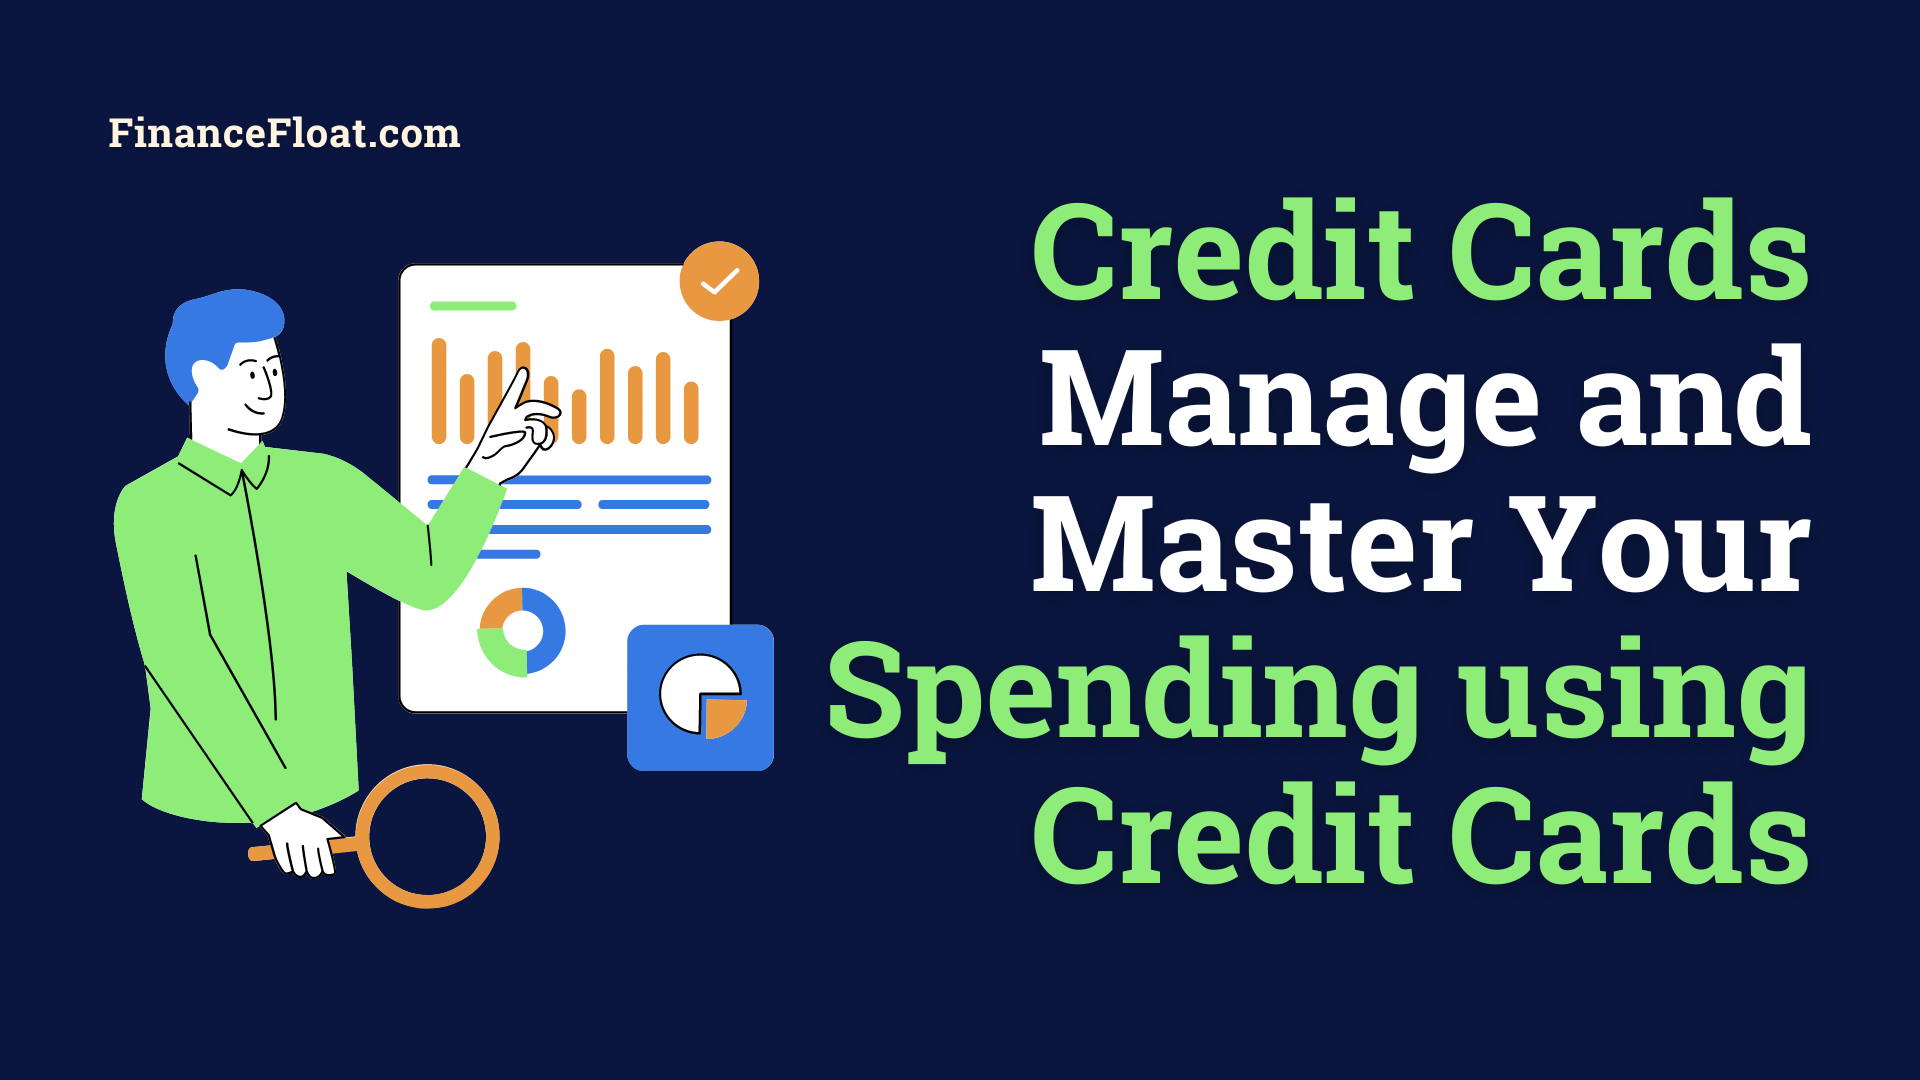 Credit Cards Manage and Master Your Spending using Credit Cards